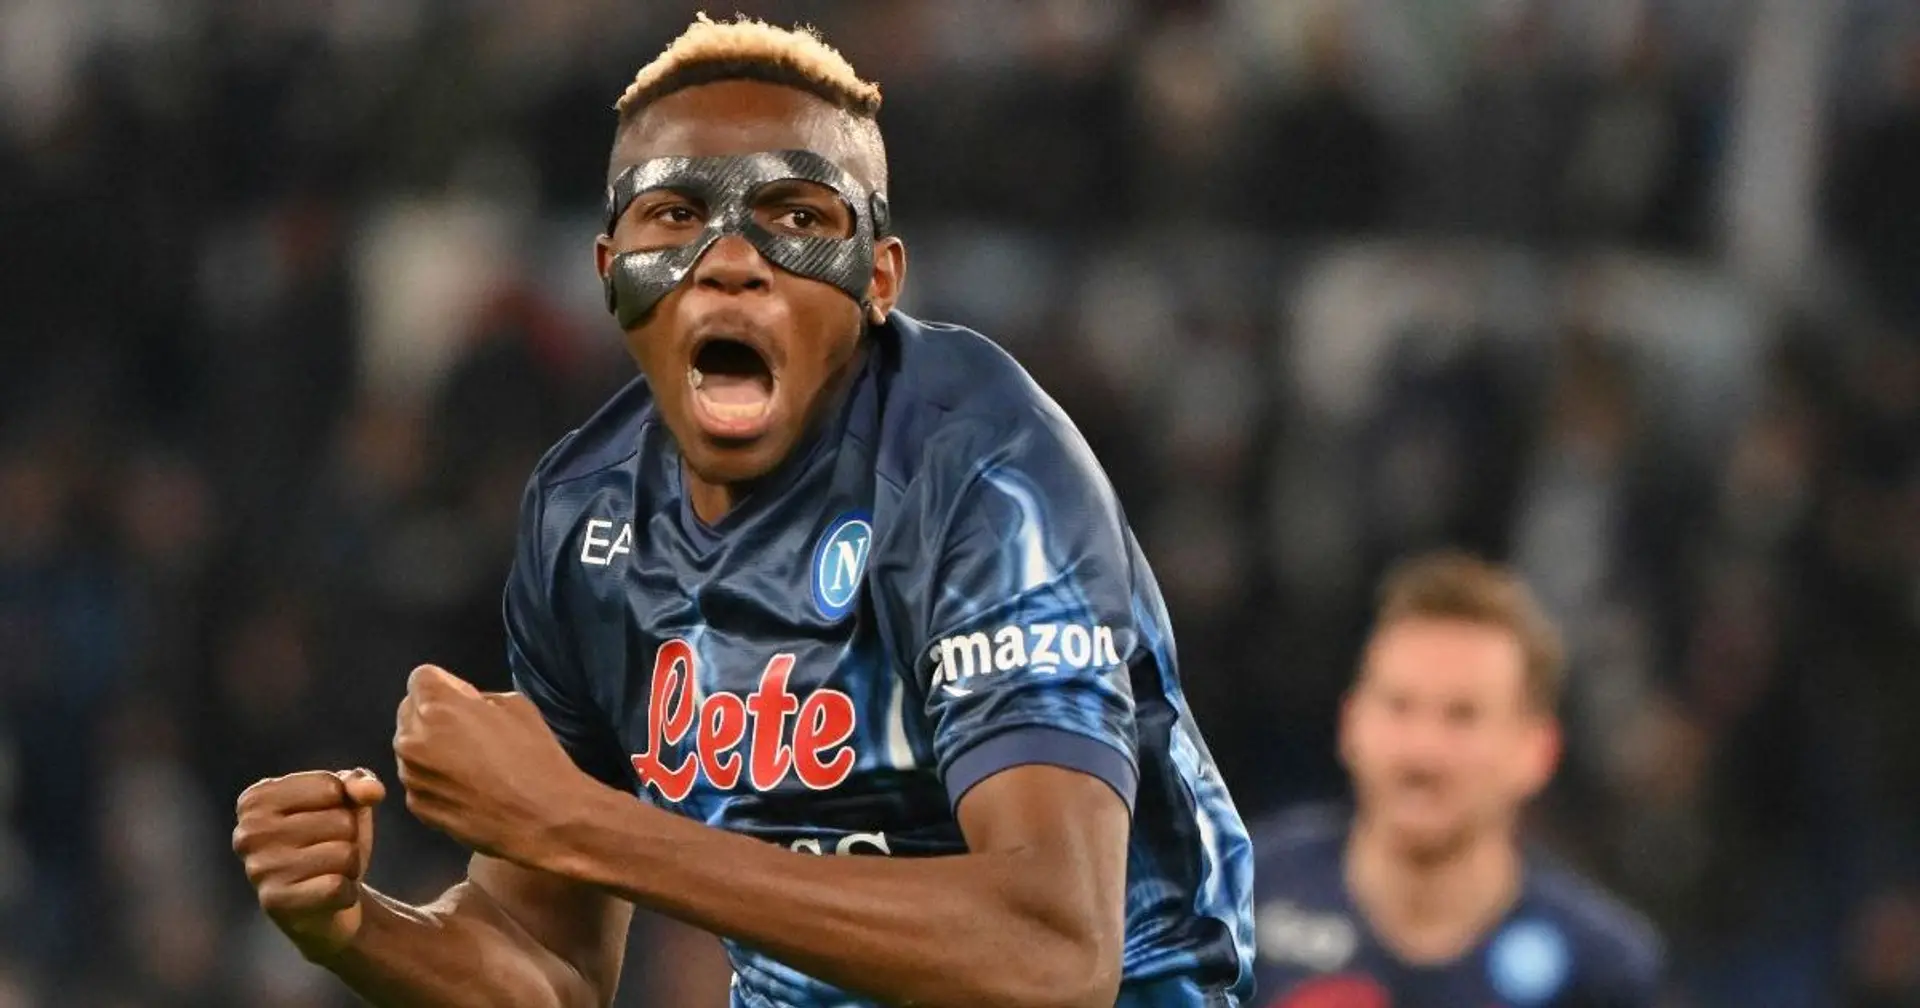 Area Napoli: Man United ready to pay Victor Osimhen £120,000-a-week (reliability: 3 stars)